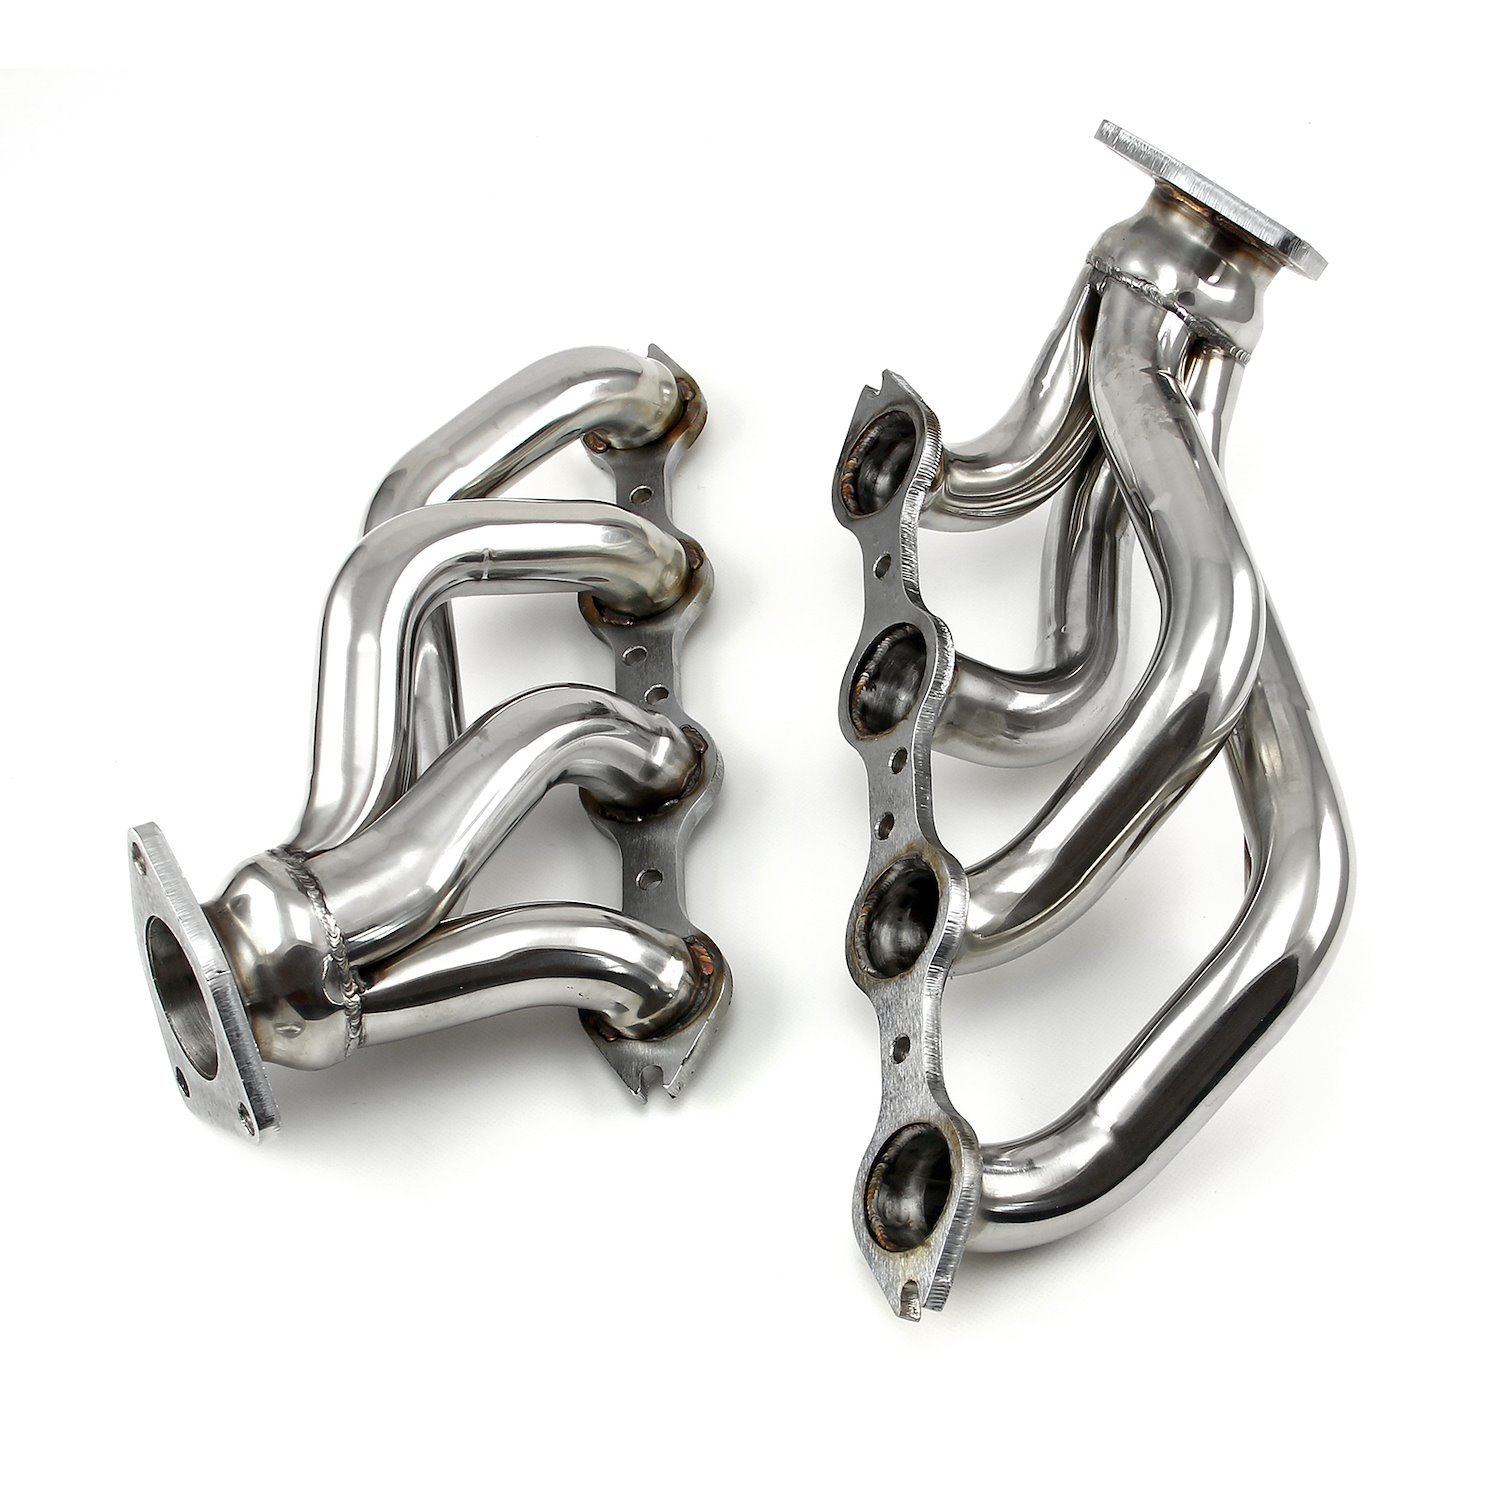 Shorty Exhaust Headers GM LS1/LS6 for Cadillac, Chevy,